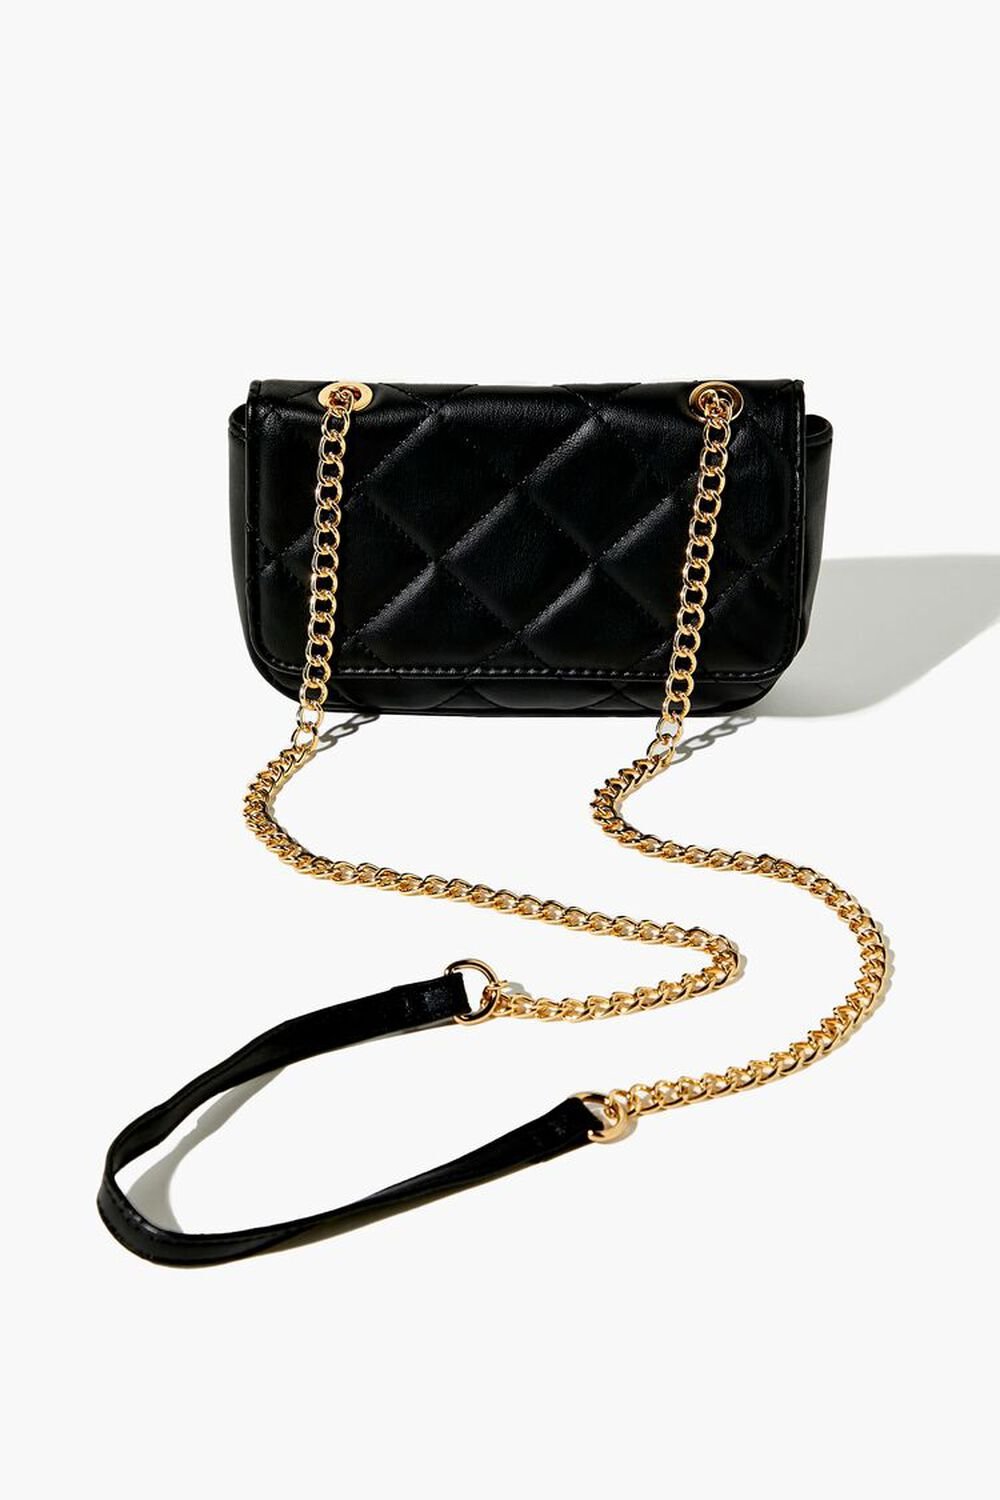 BLACK Quilted Faux Leather Crossbody Bag, image 1